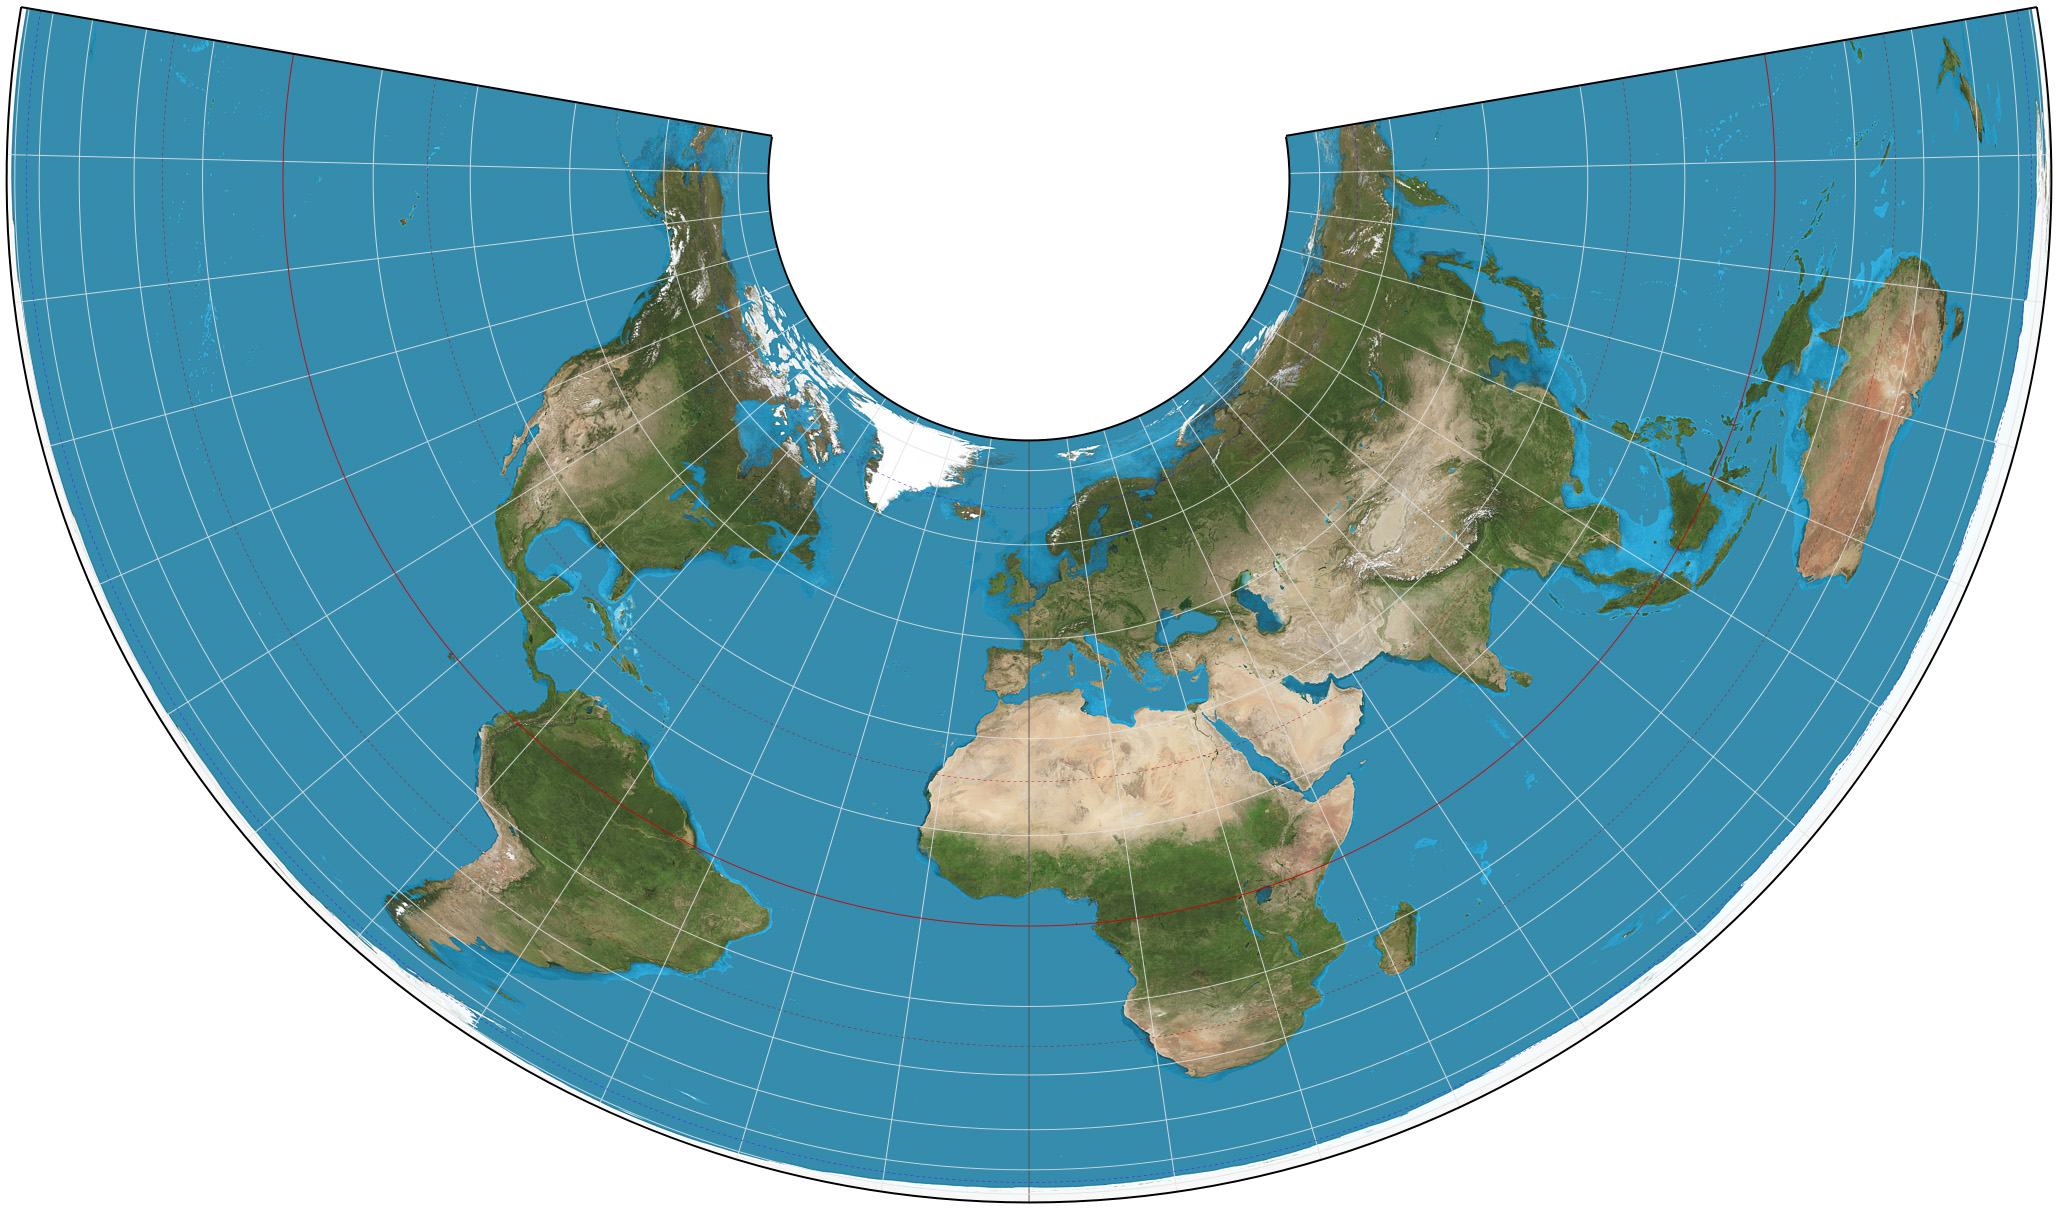 Alber's conic projection